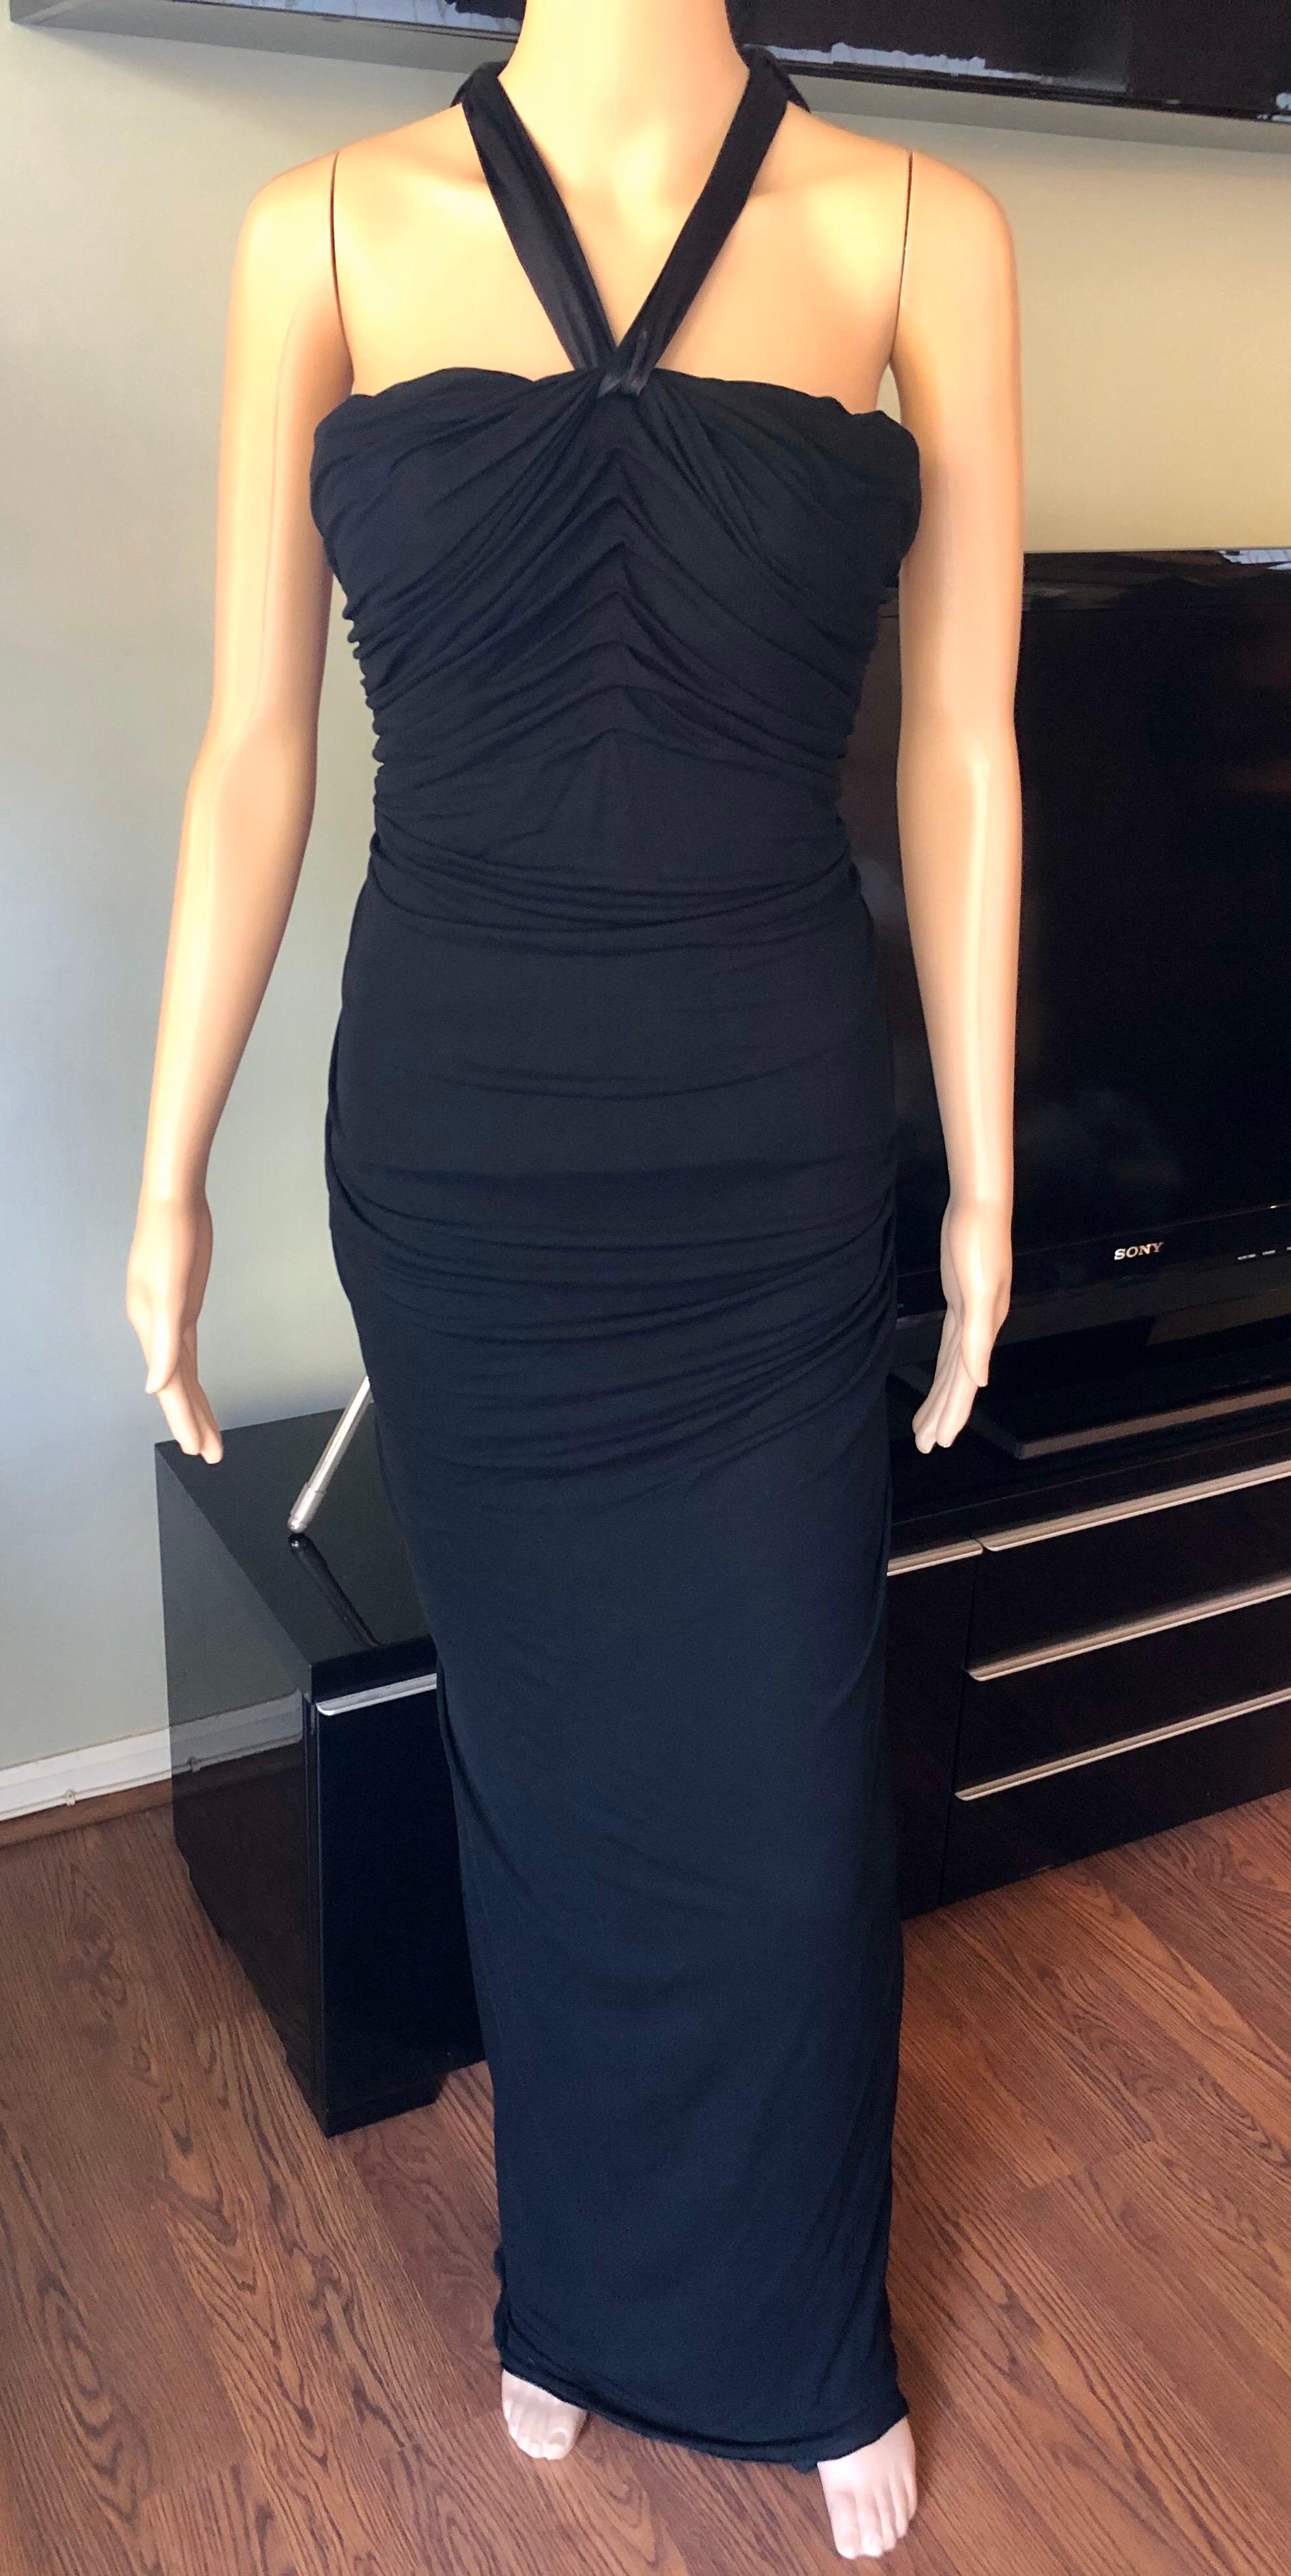 Dolce & Gabbana c.2000 Halter Cutout Open Back Black Evening Dress Gown In Good Condition For Sale In Naples, FL